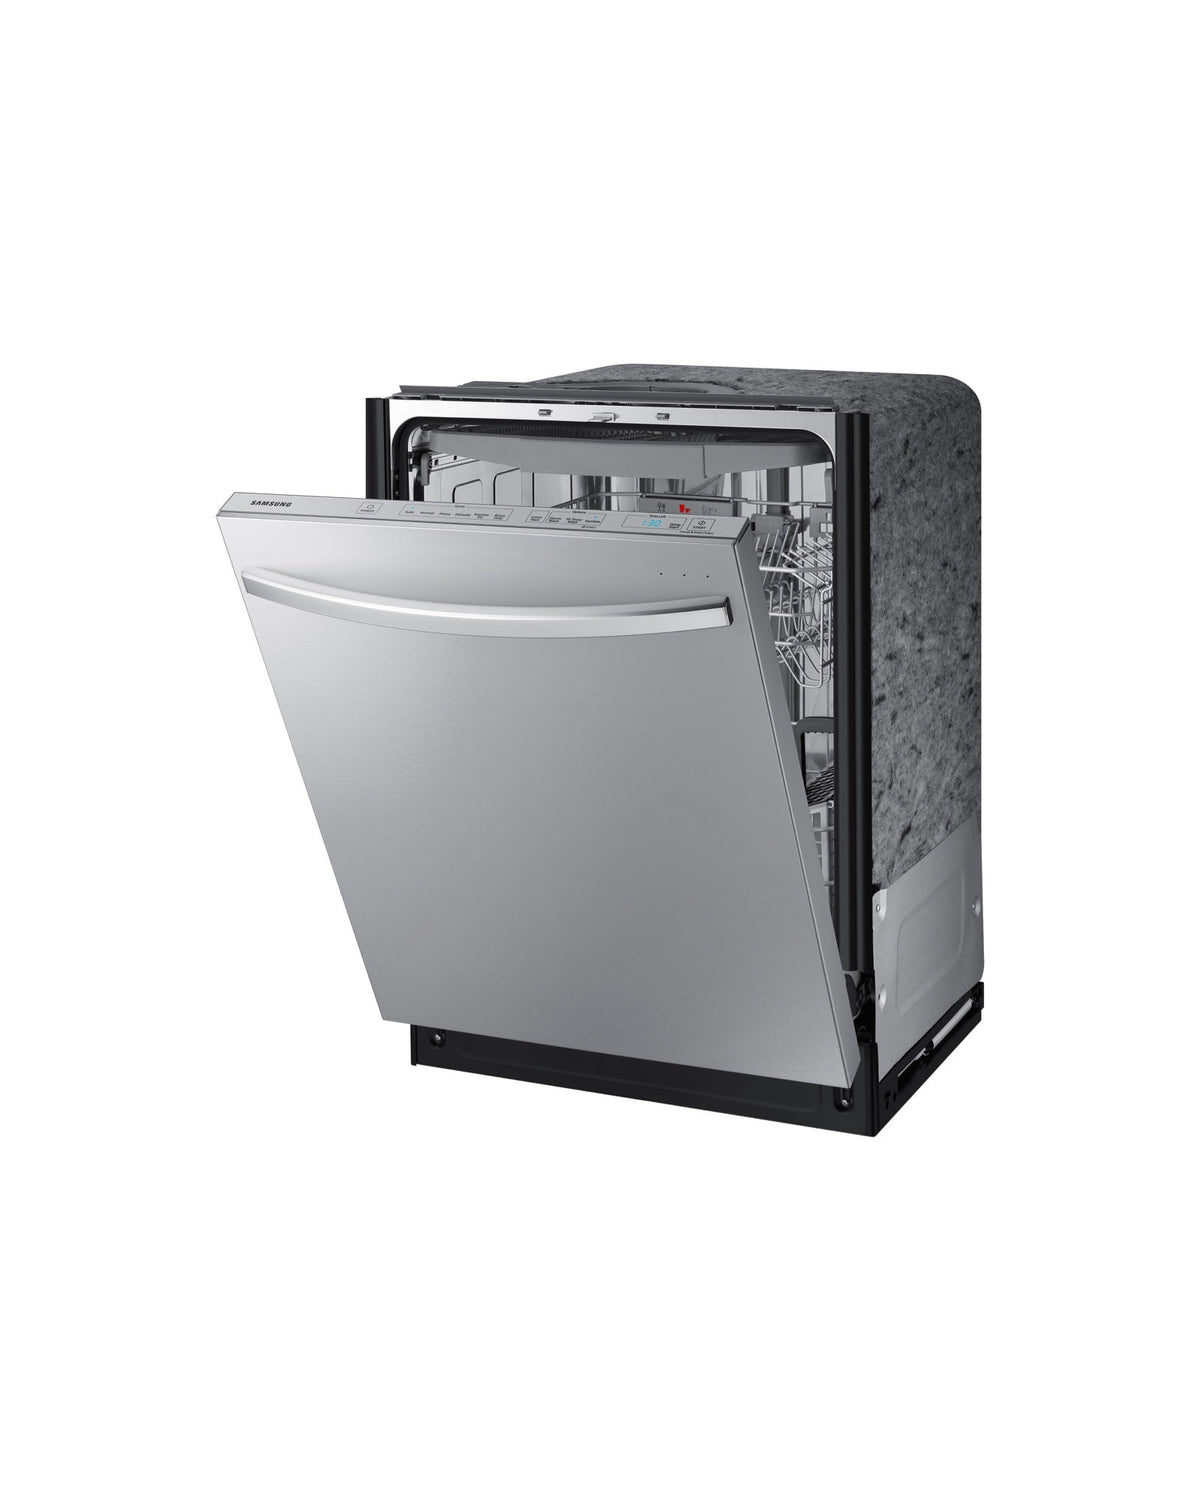 SAMSUNG DW80R7061US/AA Dishwasher in Stainless Steel